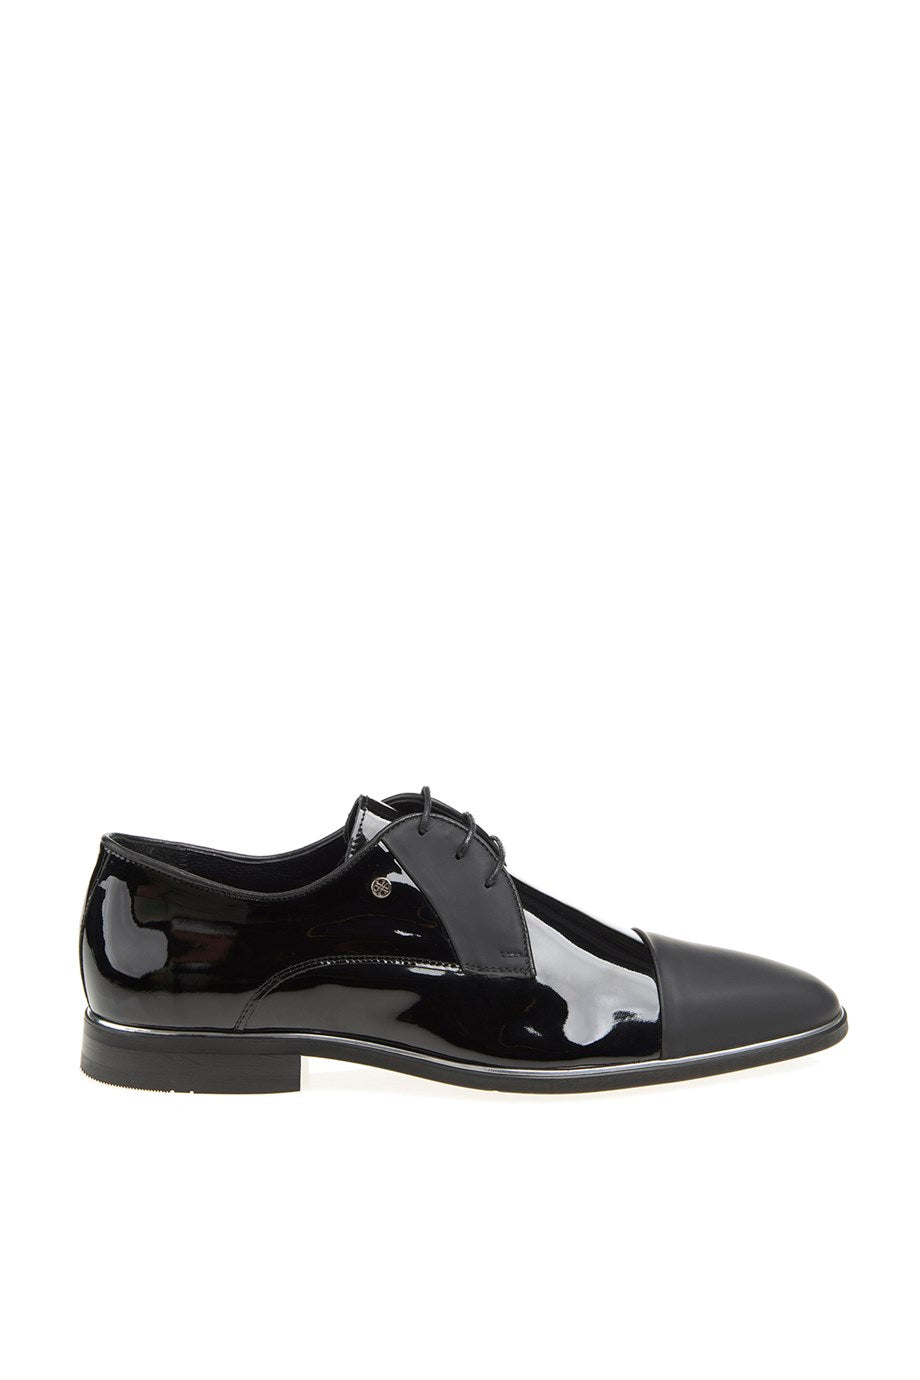 Neolite Sole Genuine Patent Leather Classic - MENSTYLEWITH